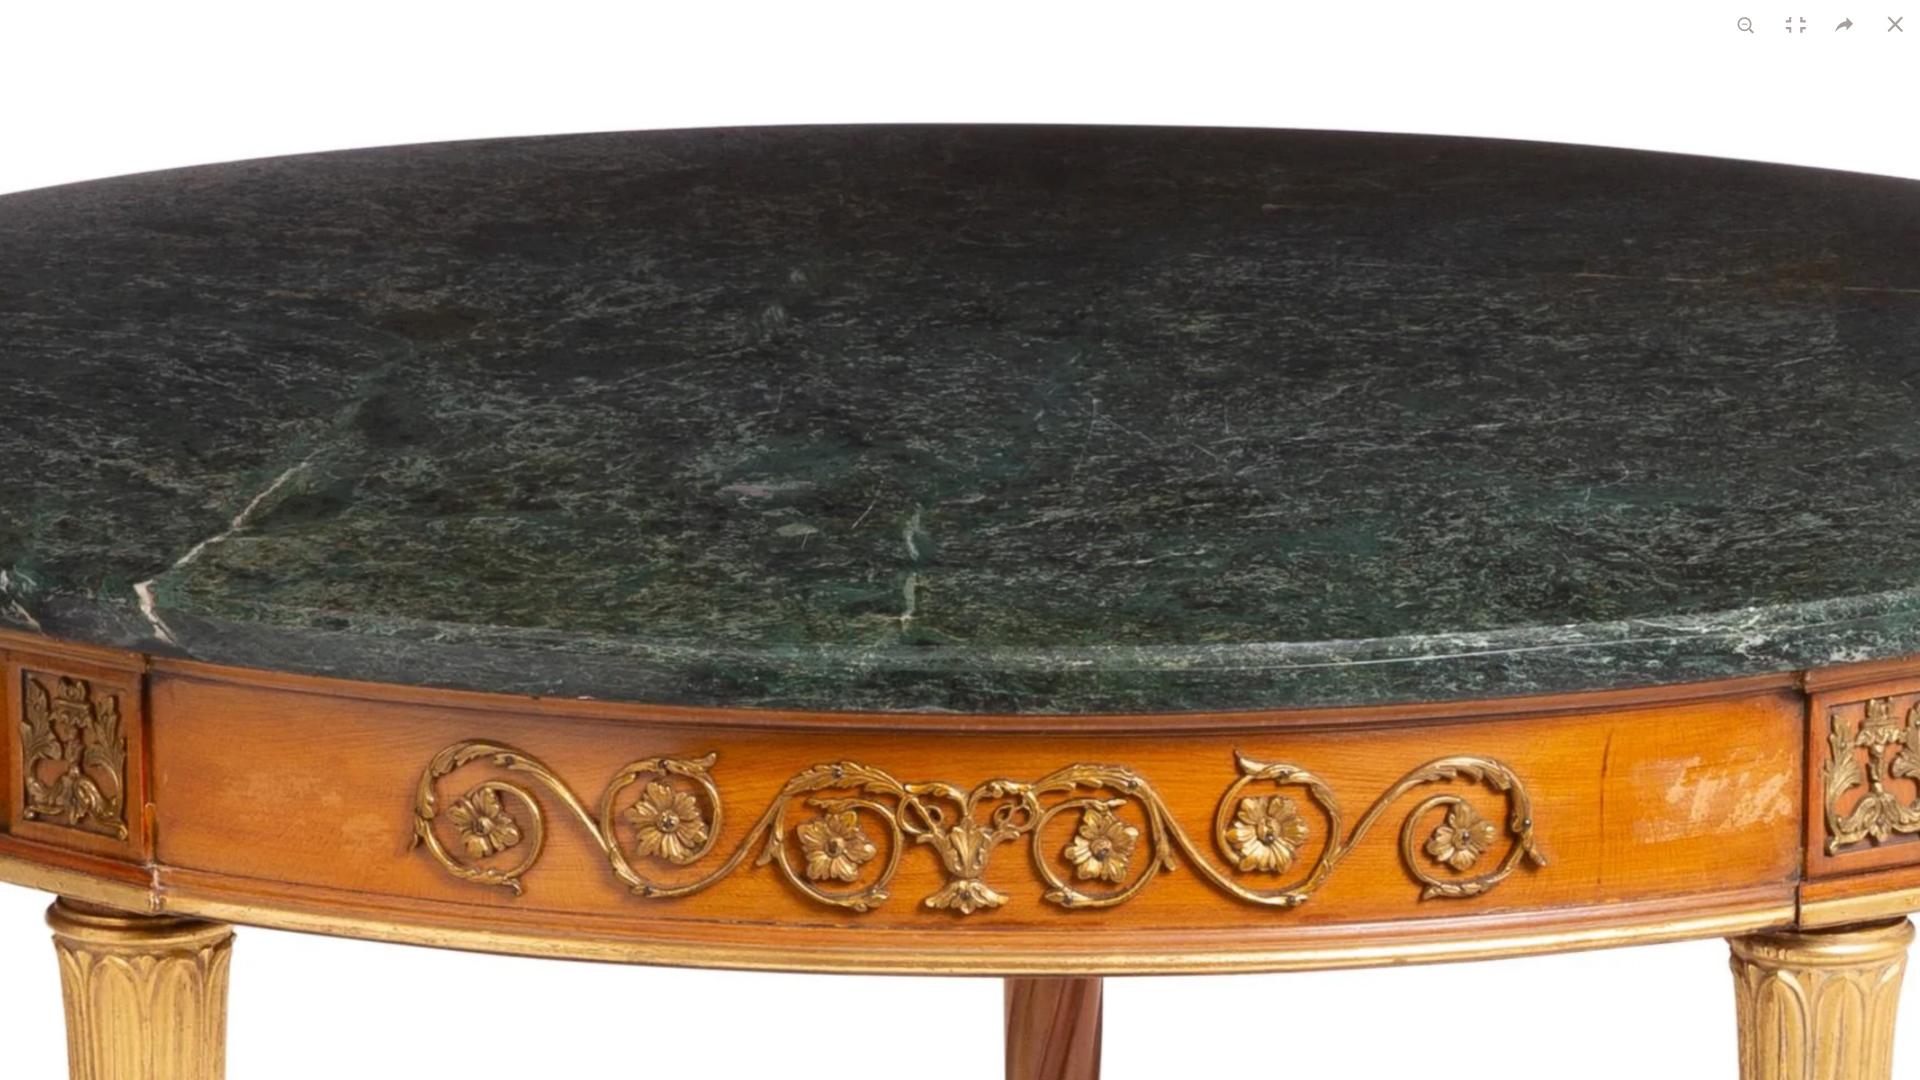 Carved French Gilt Bronze Mounted Fruitwood Center Table, circa 1900